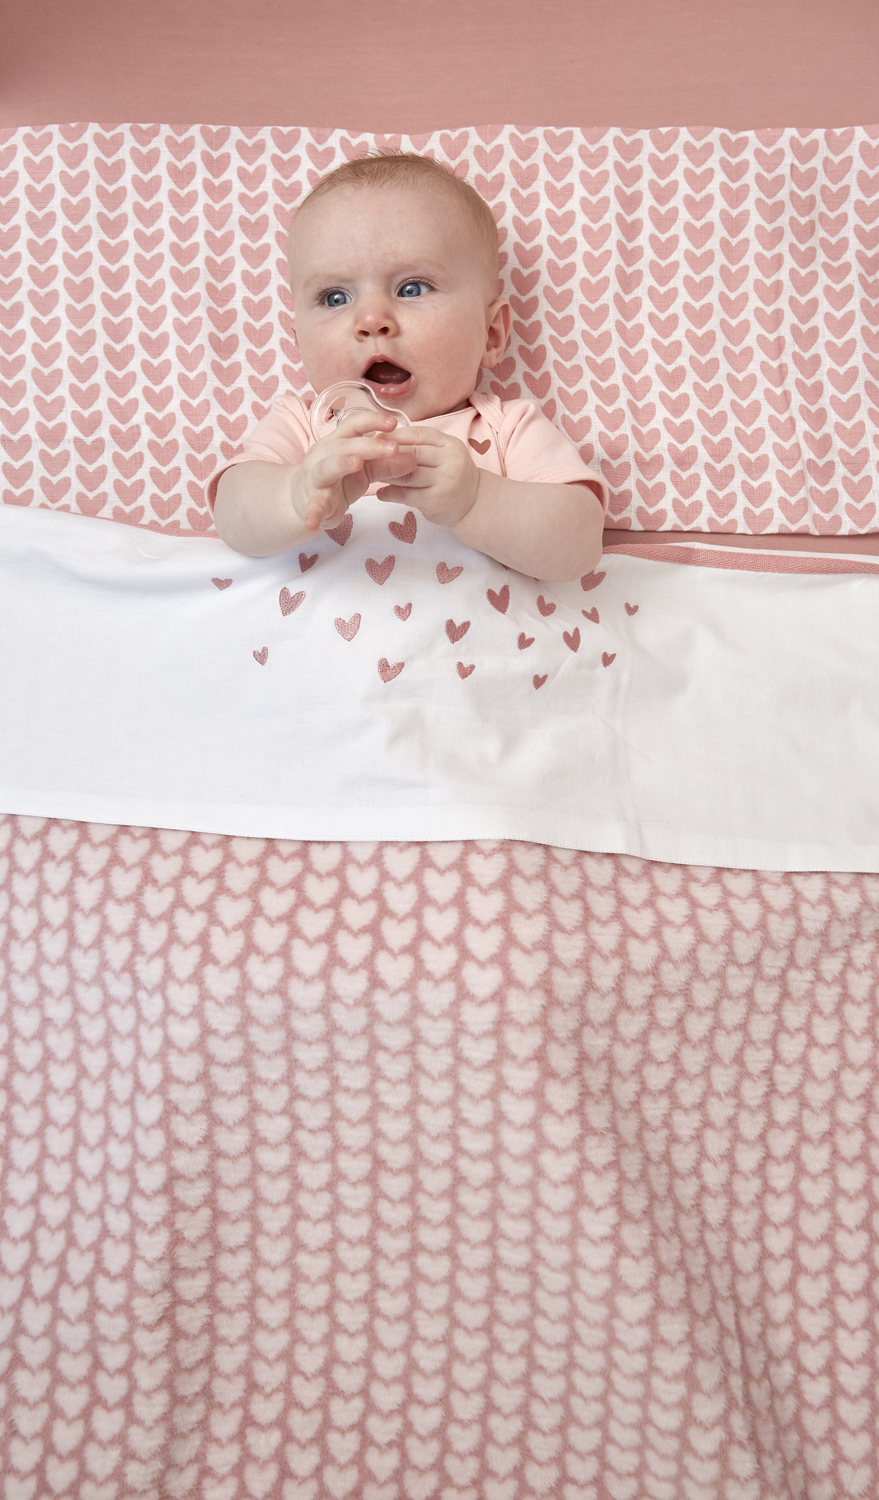 Cot bed sheet Hearts - old pink - 100x150cm